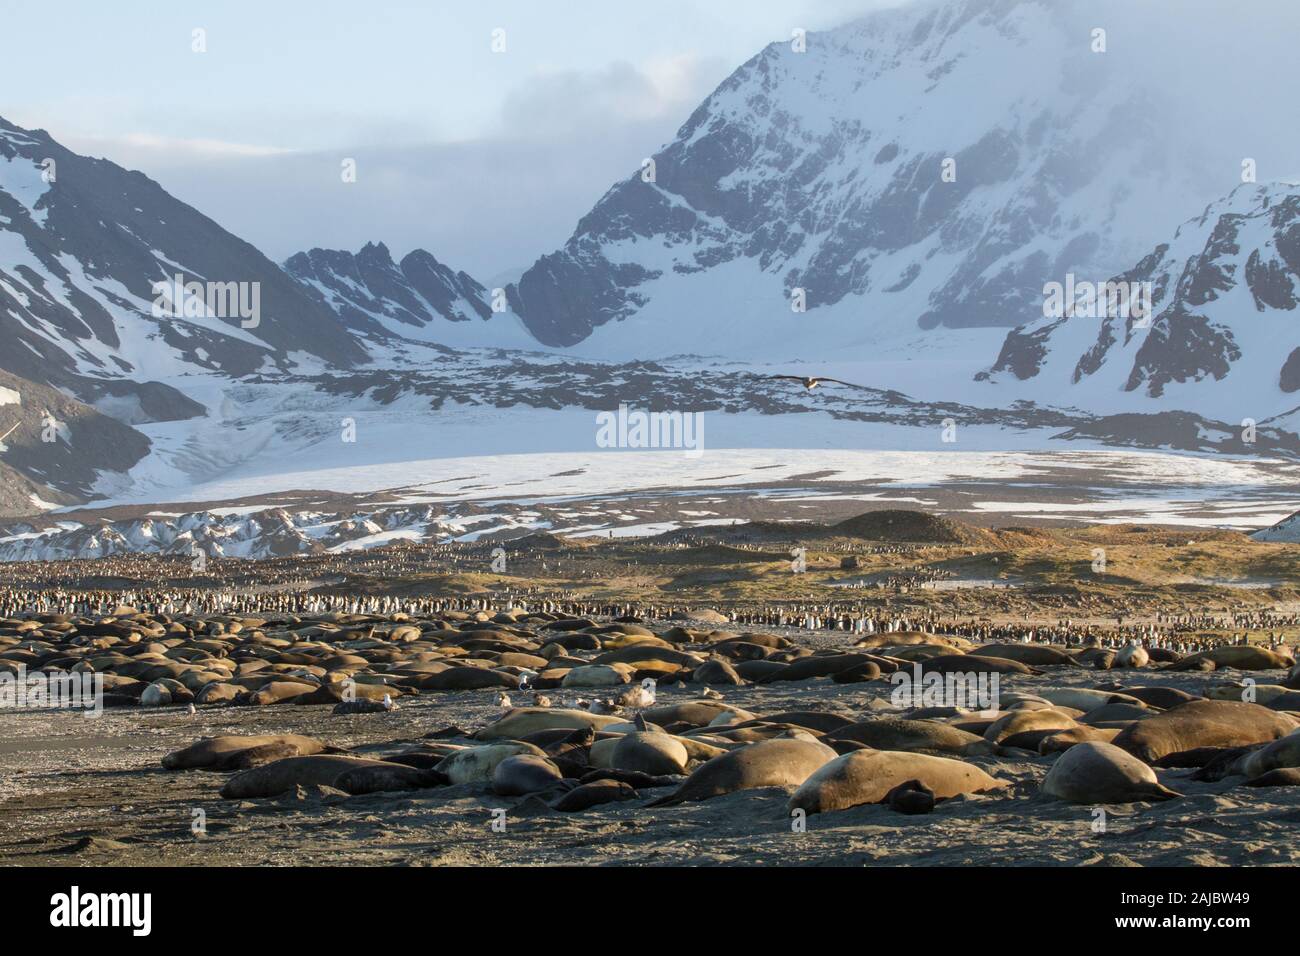 Elephant Seal and King Penguin Colony at St Andrews Bay, South Georgia, Antarctica Stock Photo